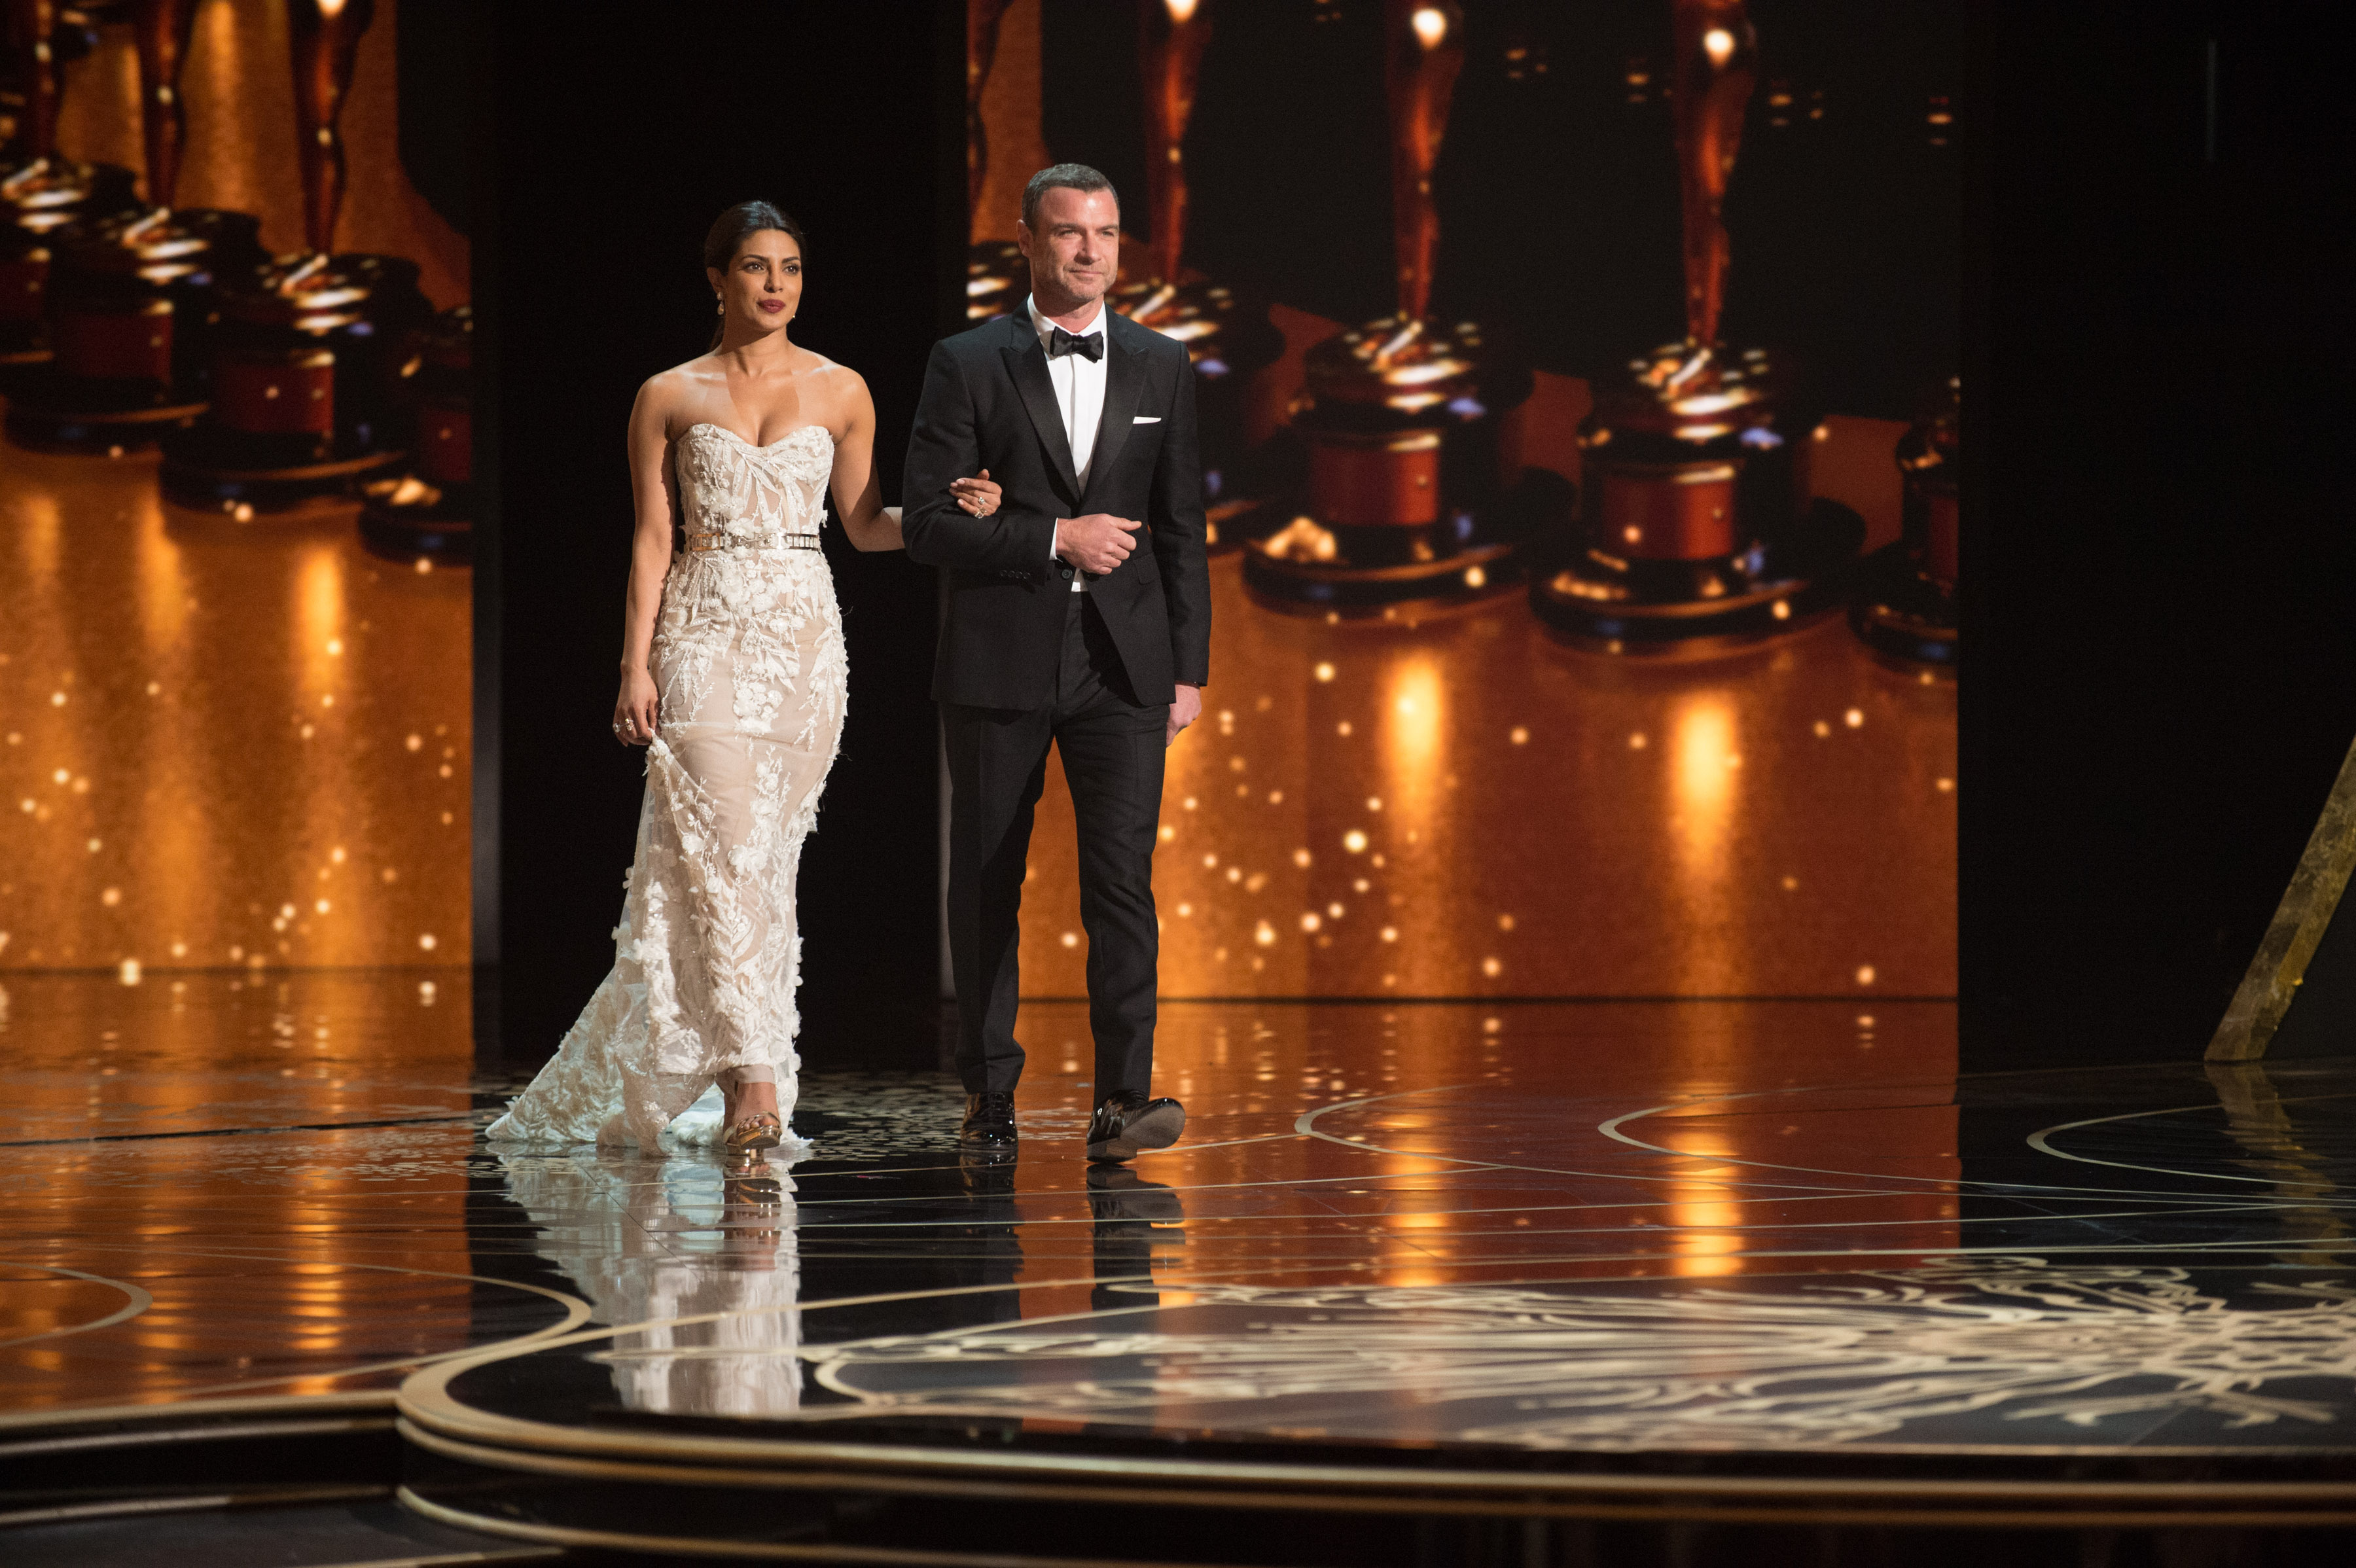 Presenters Priyanka Chopra and Liev Schreiber on stage during the live ABC Telecast of The 88th Oscars® at the Dolby® Theatre in Hollywood, CA on Sunday, February 28, 2016.